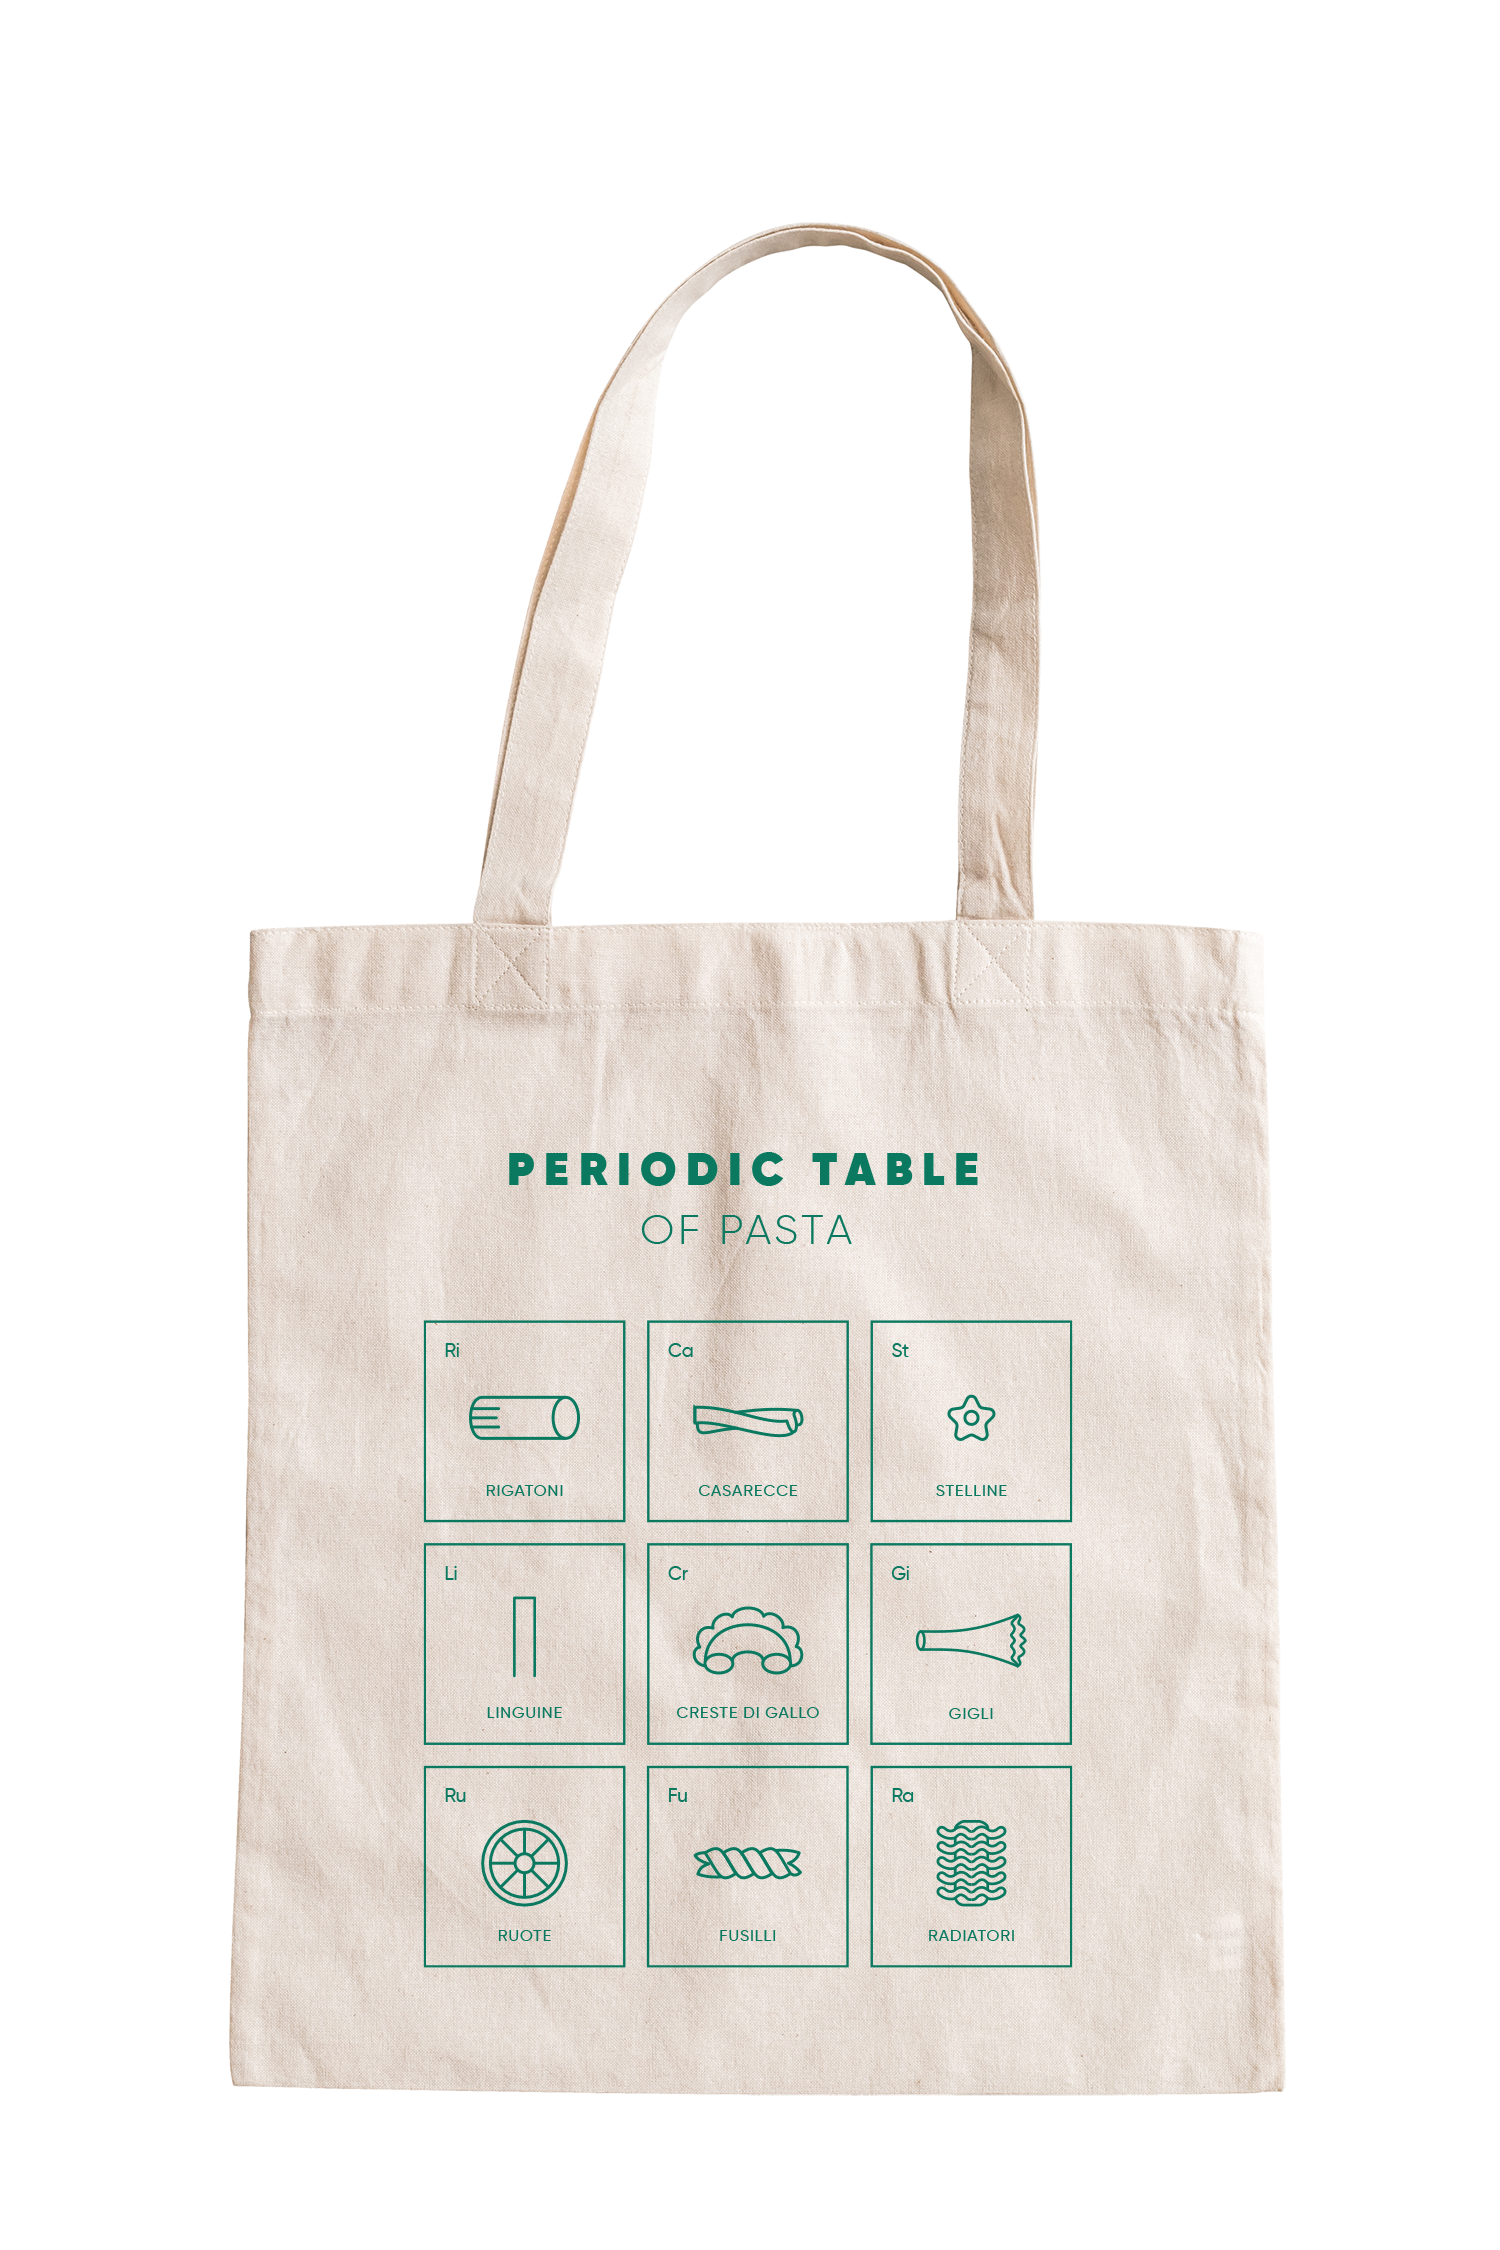 Featured image for “Pasta Periodic Table Tote Bag”